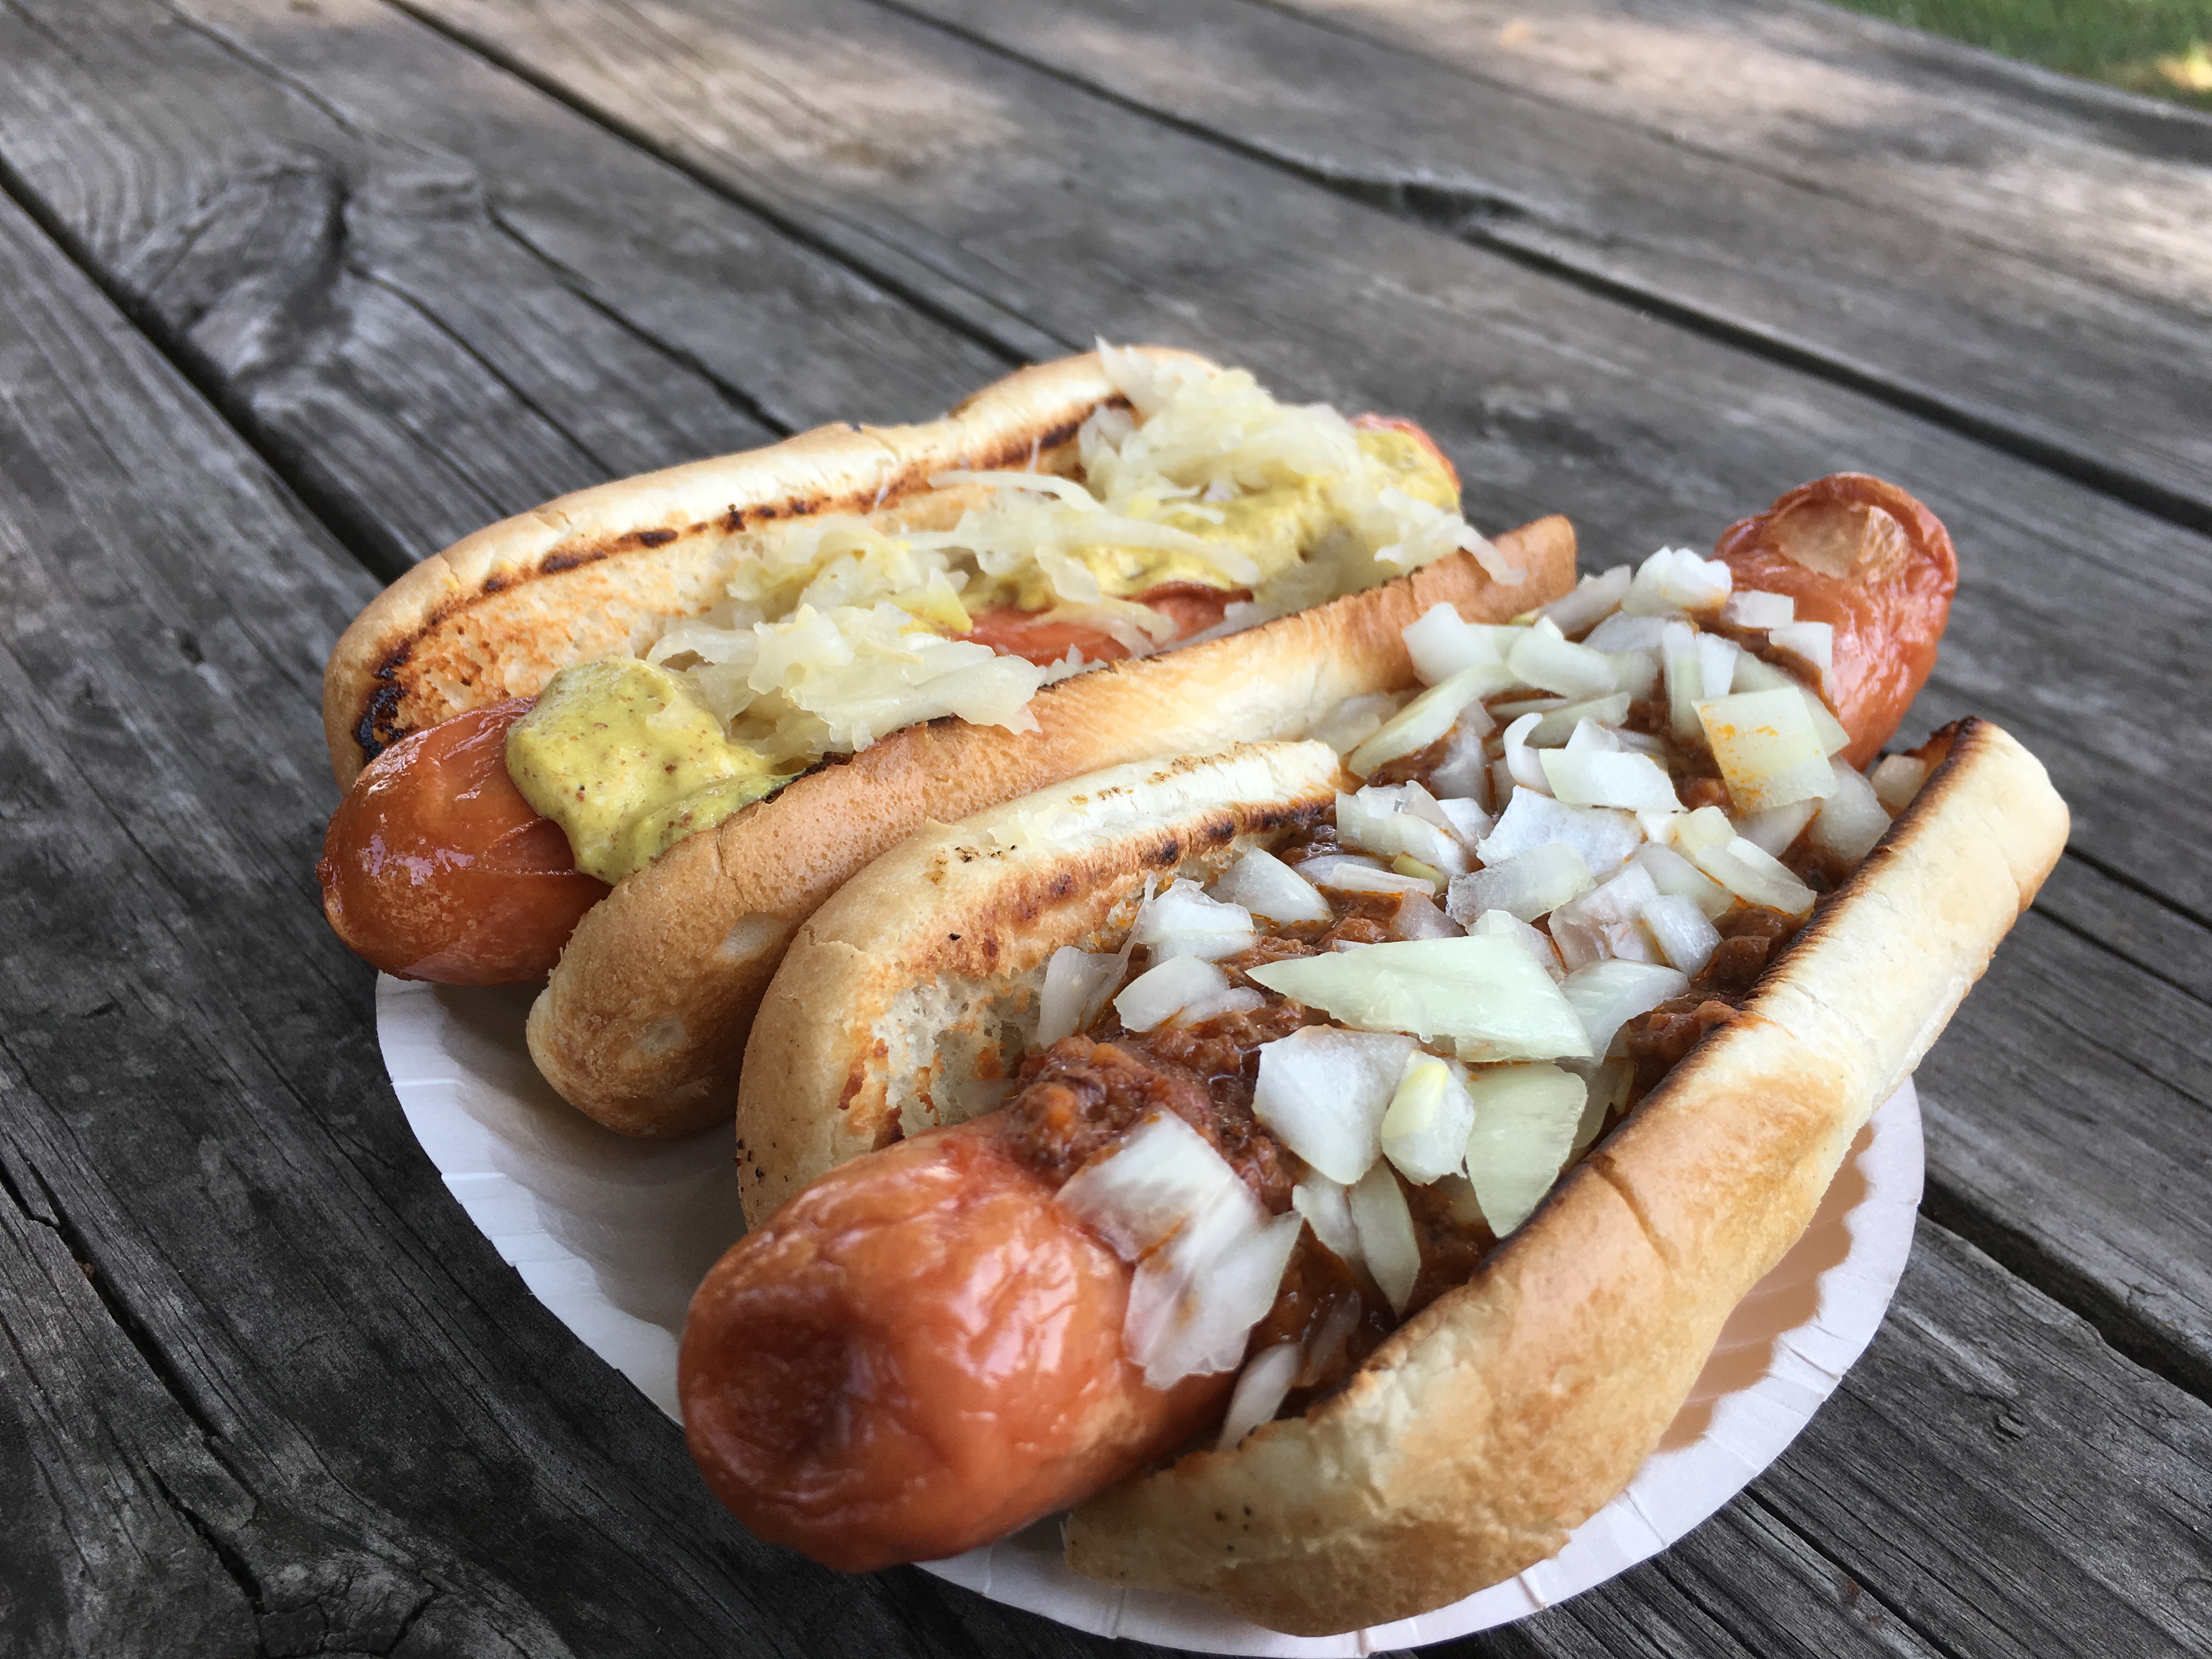 N.J.'s 25 best hot dog joints ranked, for National Hot Dog Day